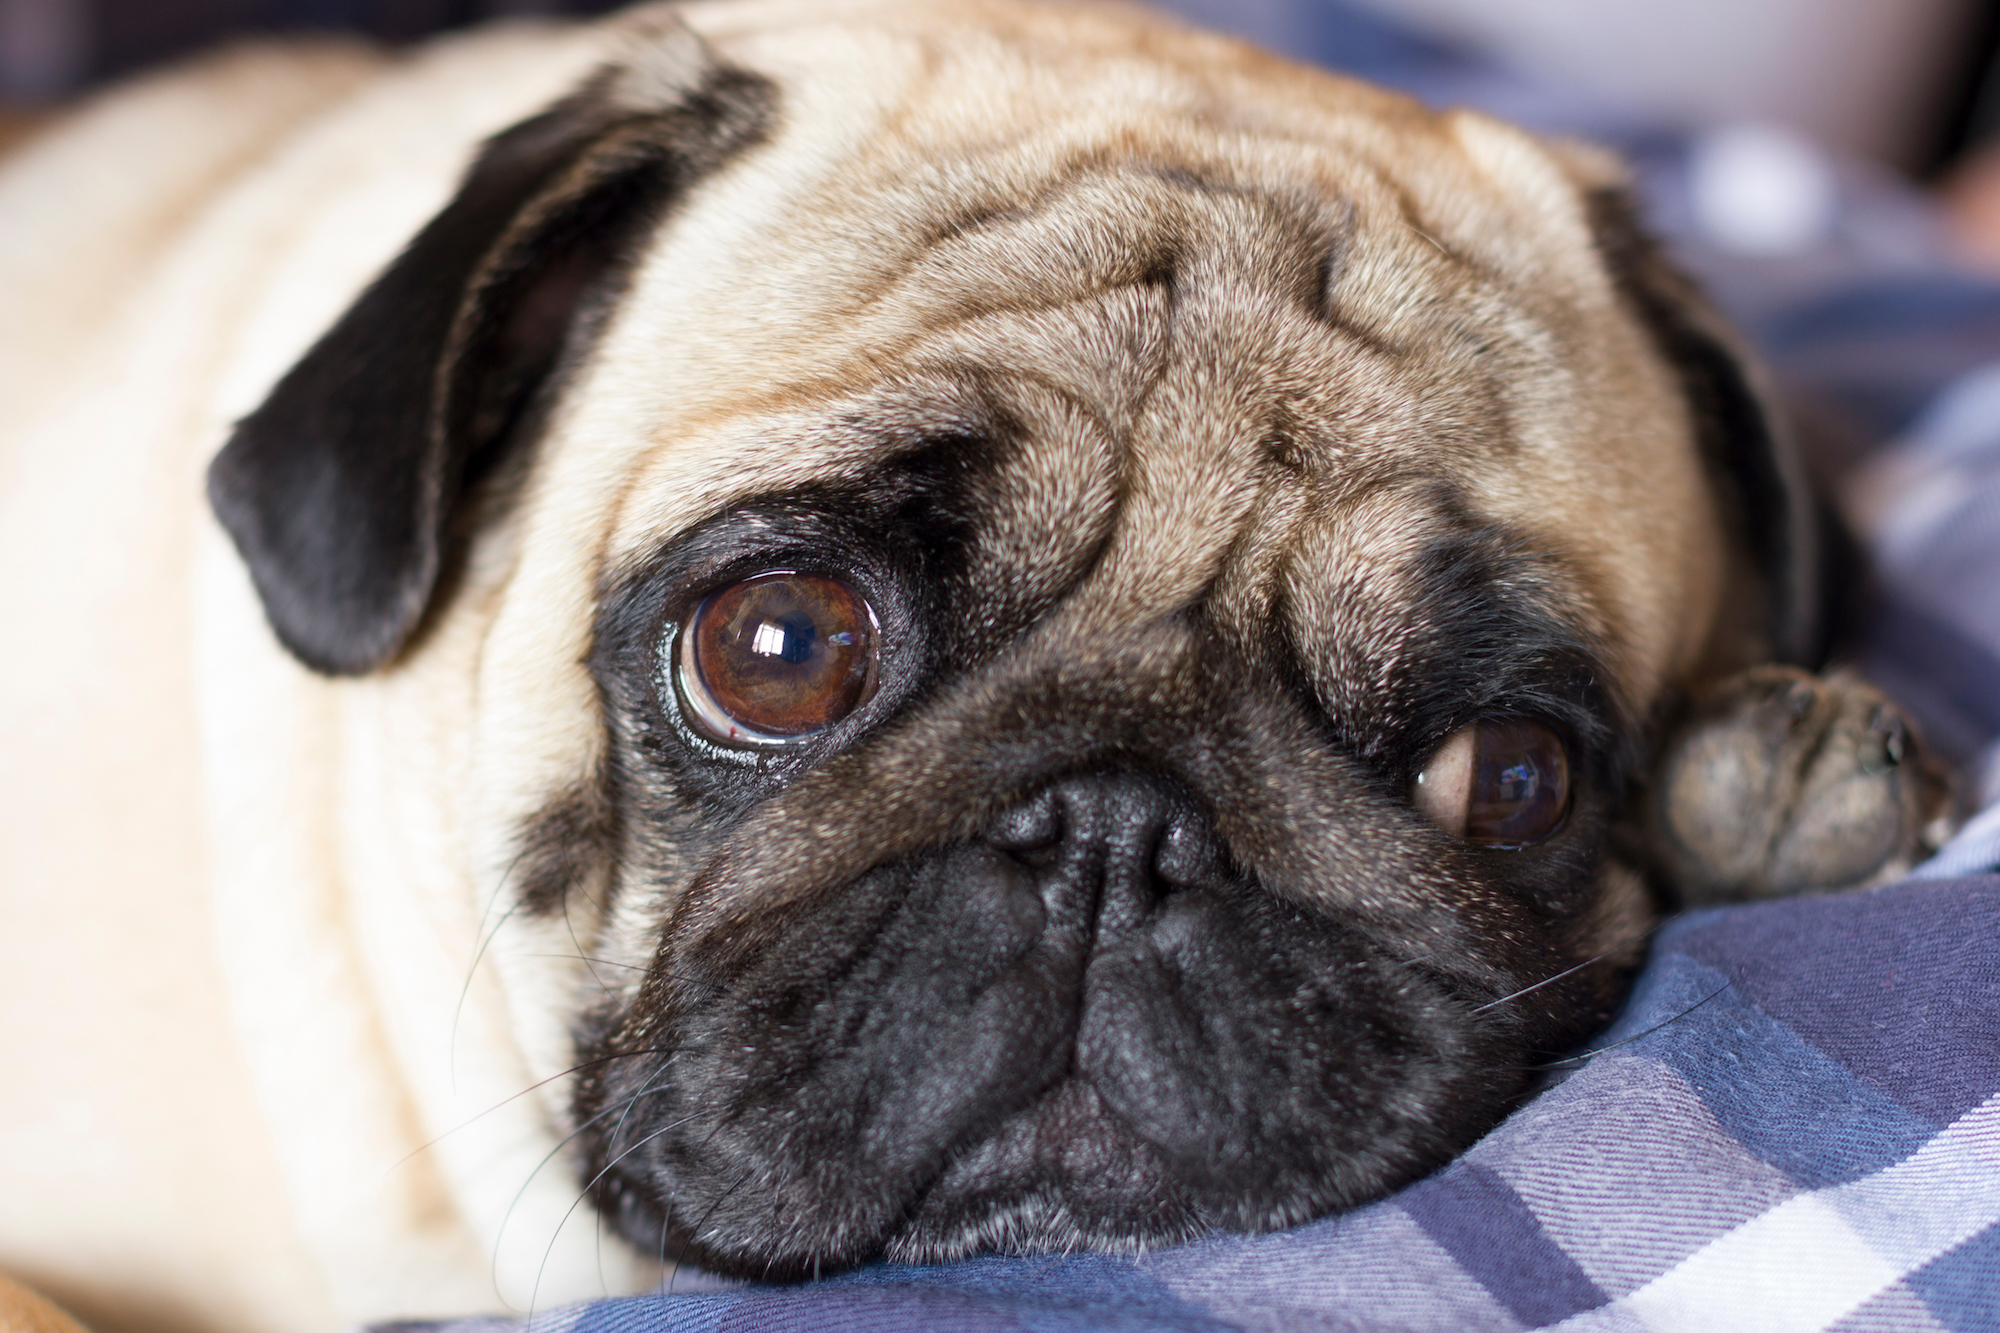 Dogs Evolved Sad Eyes to Manipulate Their Human Companions, Study Suggests  | Live Science